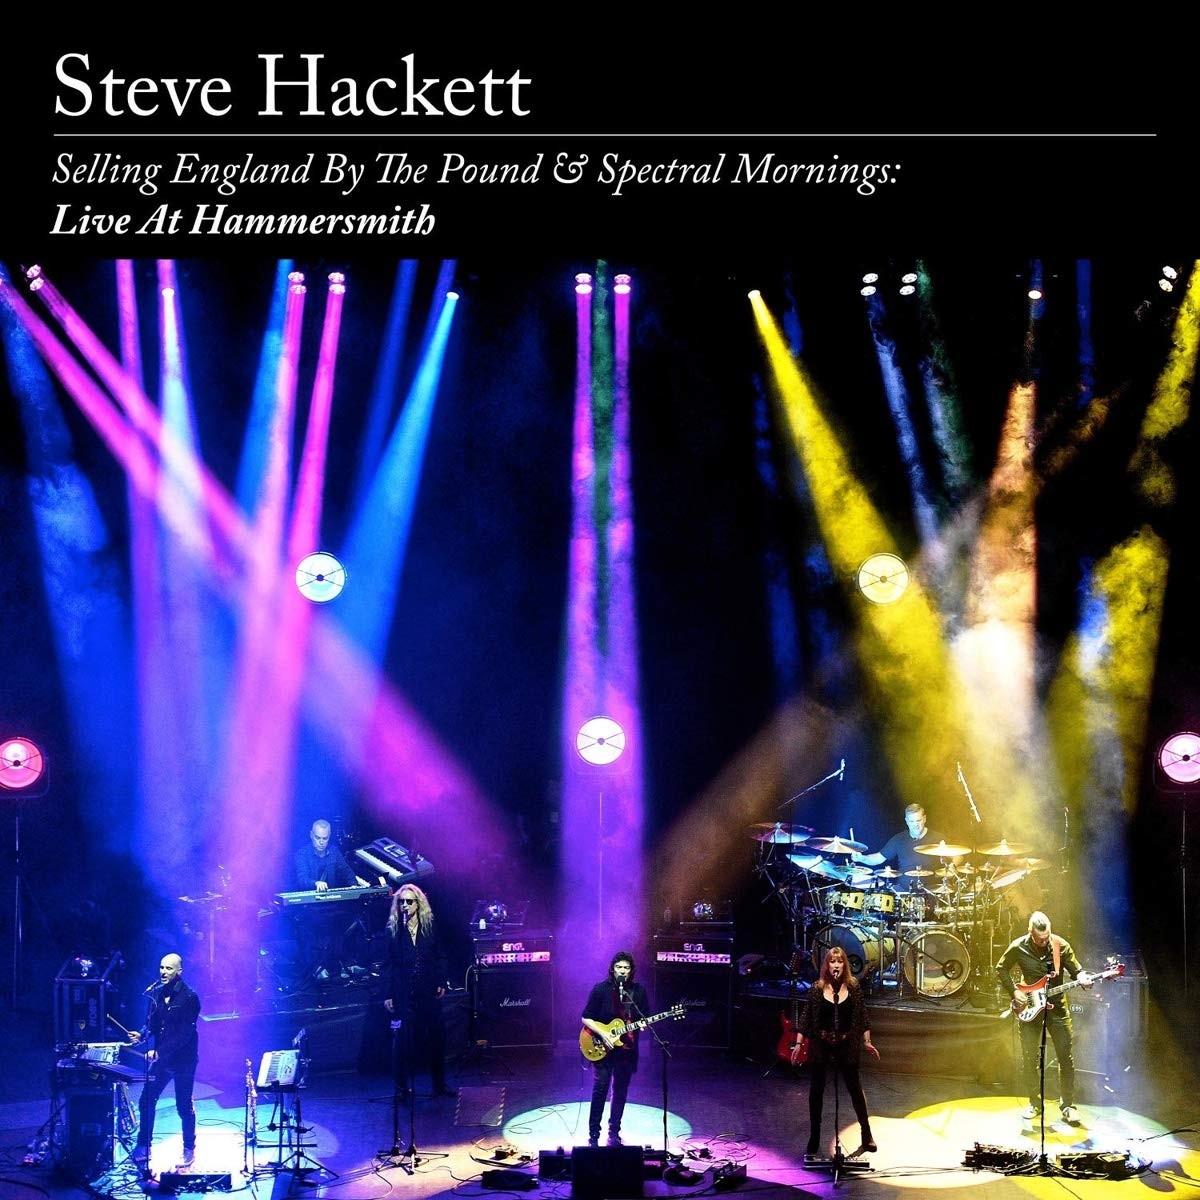 Steve Hackett - Selling England By The Pound & Spectral Mornings